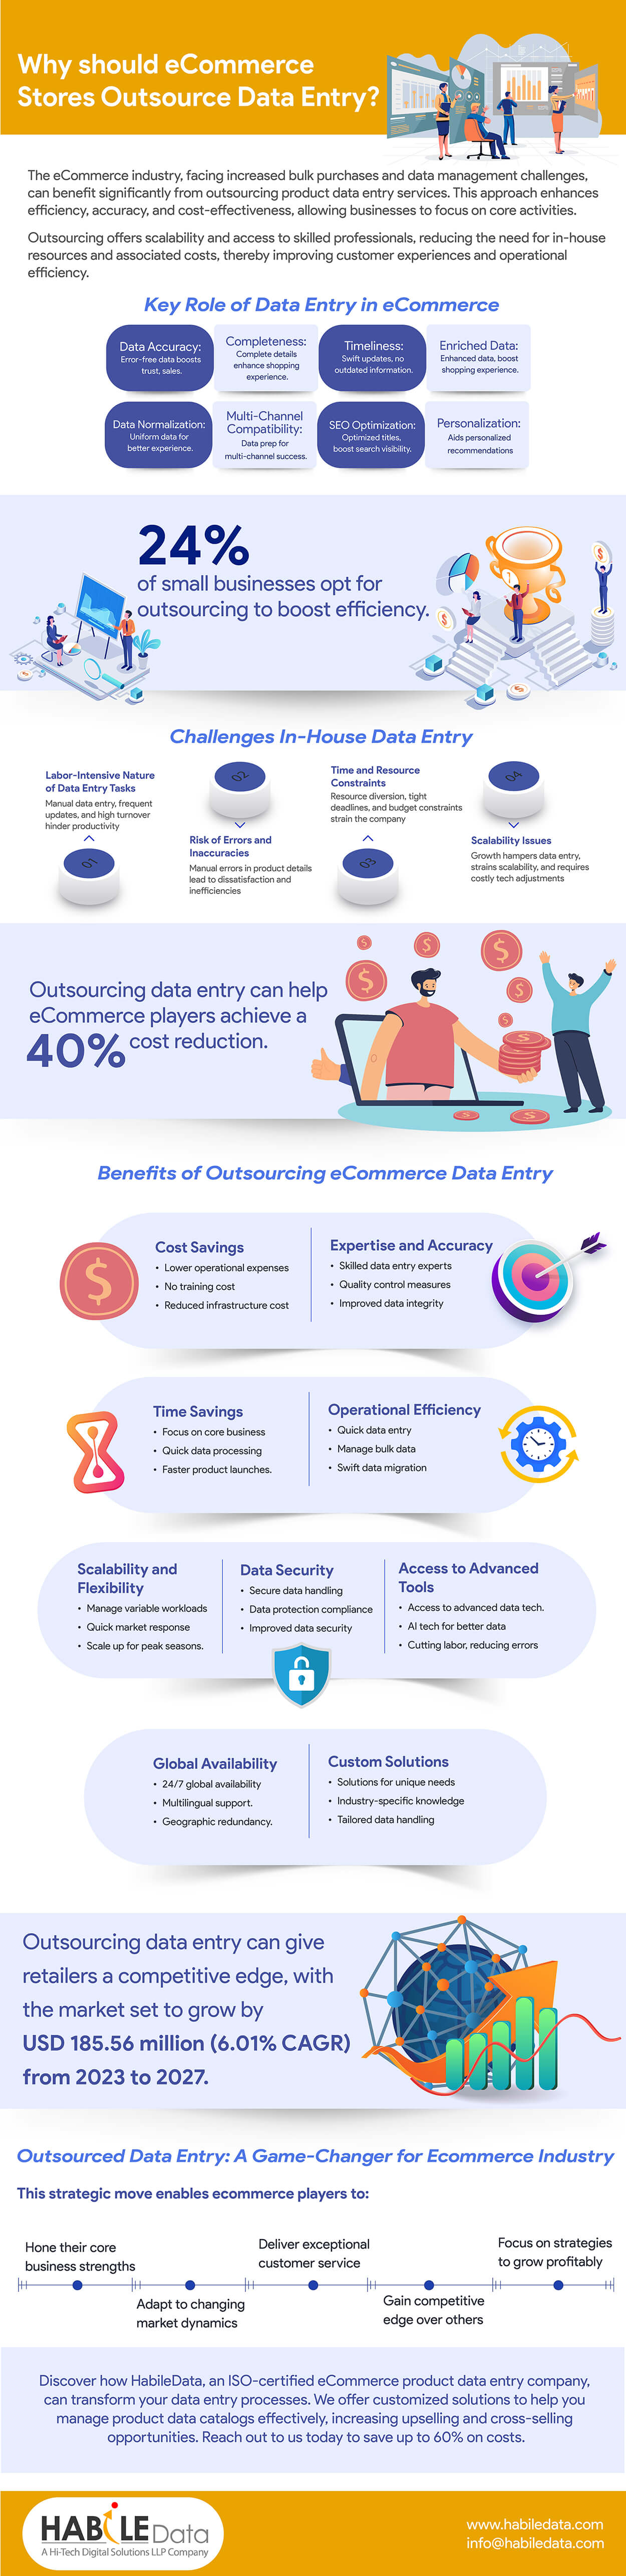 why should ecommerce stores outsource data entry